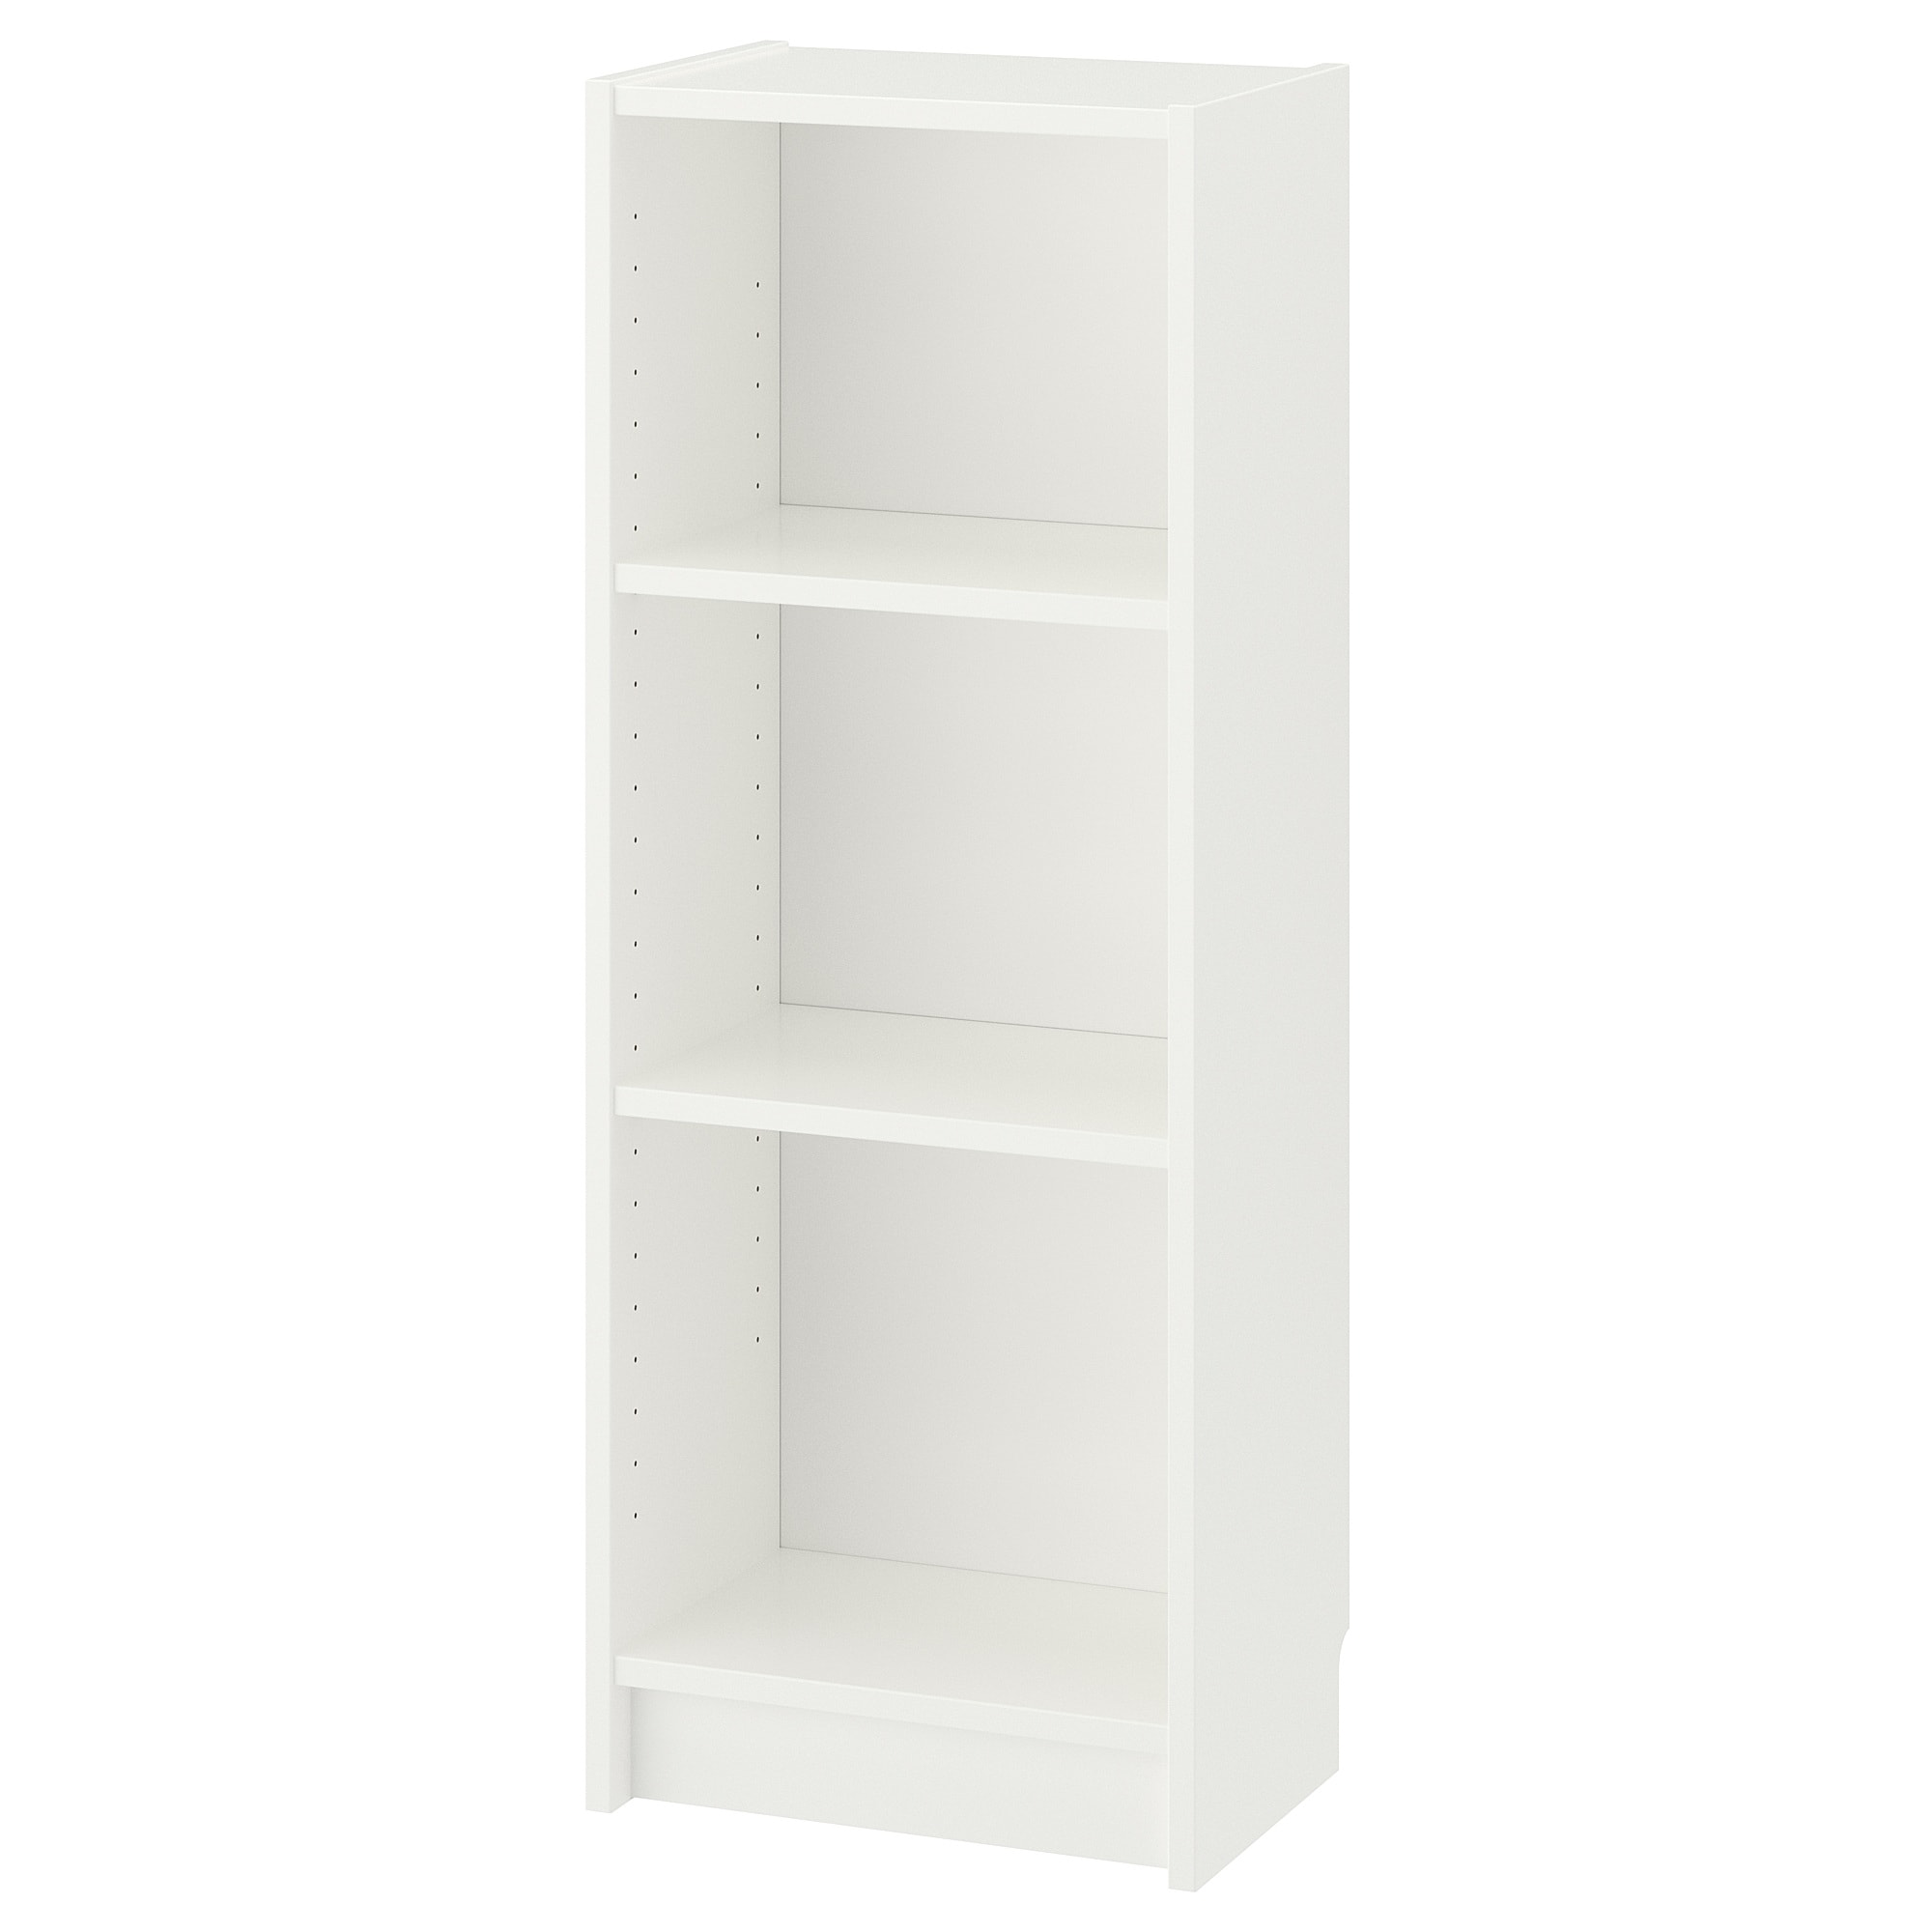 Ikea Billy Bookcase White, How To Stabilize Billy Bookcase Without Back